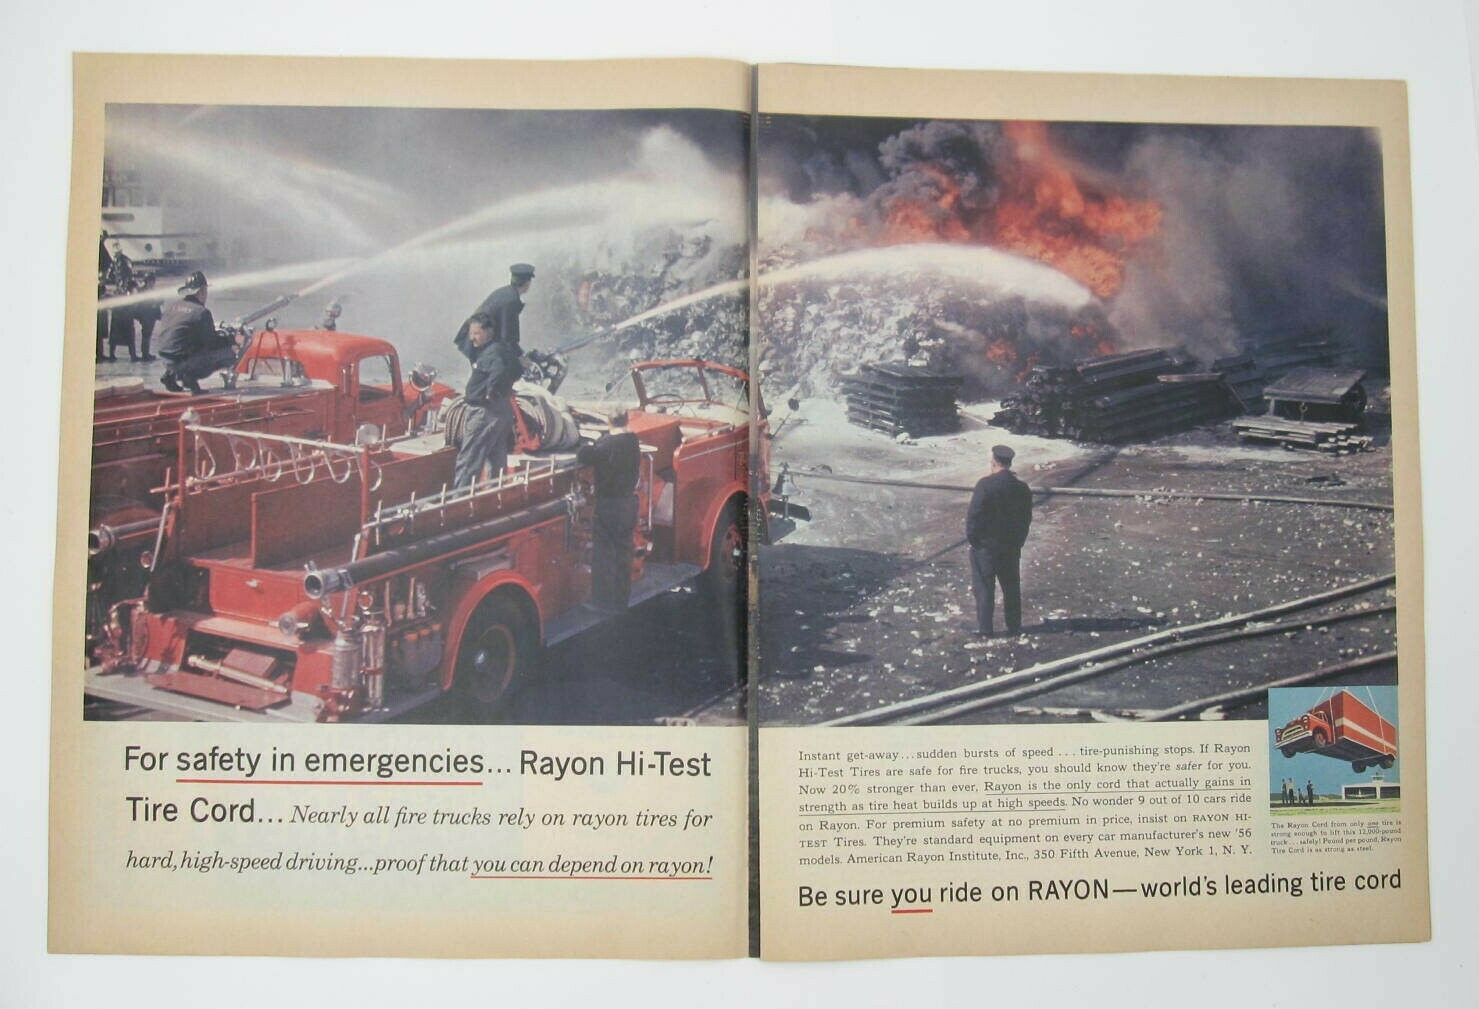 1956 Texaco Texamatic Fluid, Rayon Firefighter Putting Out Fire Print Ads (b1)